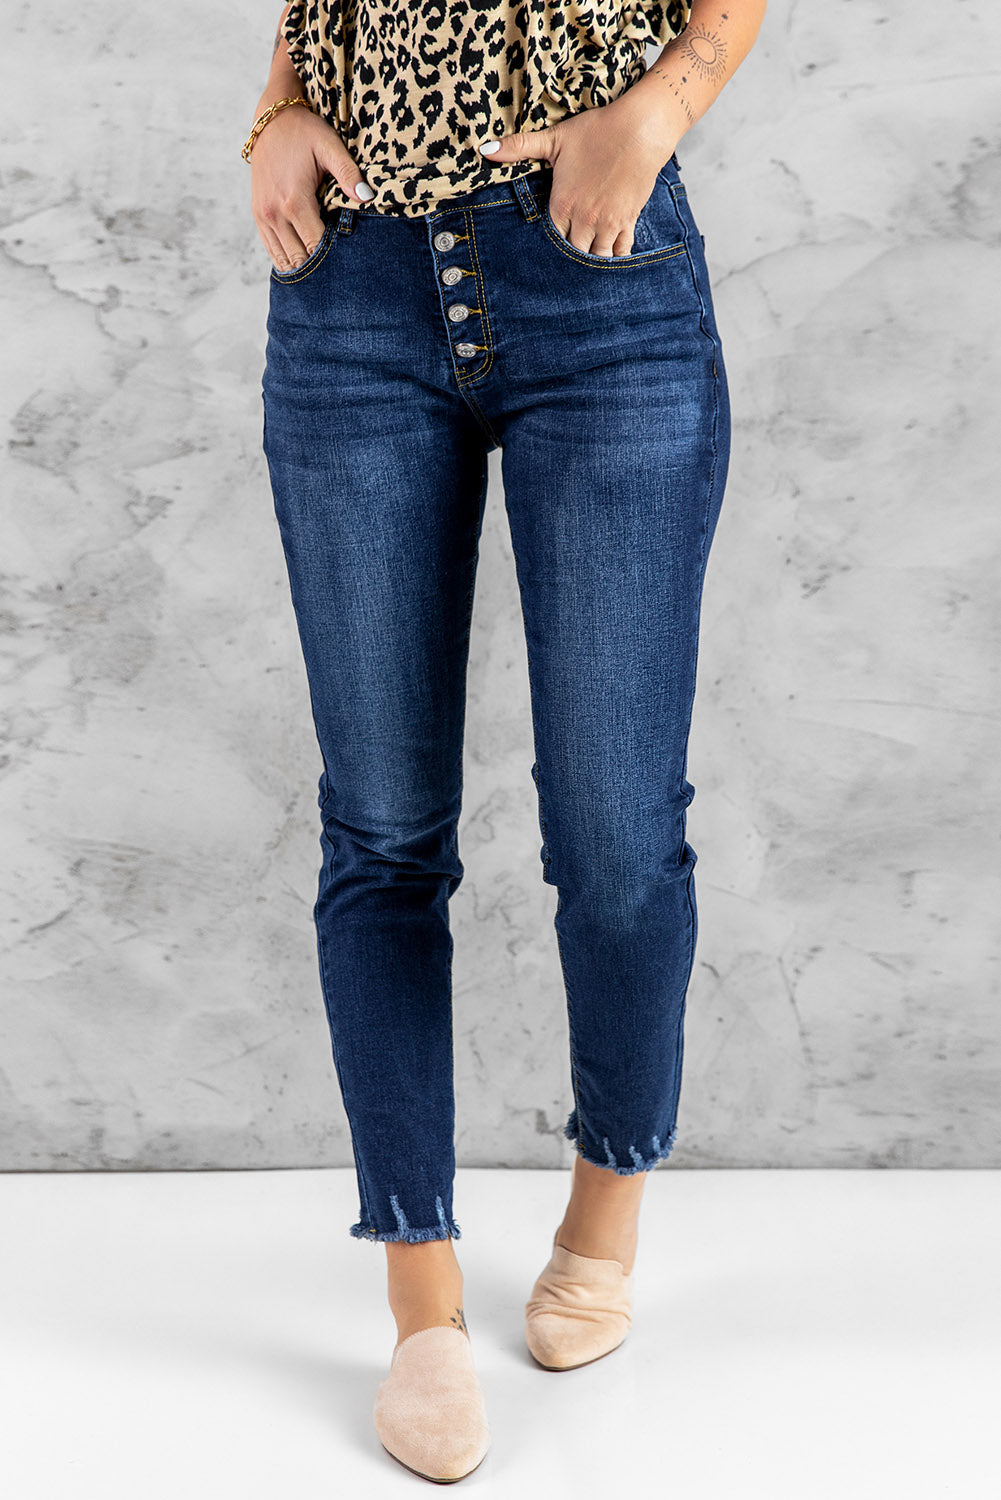 Fashion Dark Blue High Waisted Buttons Jeans